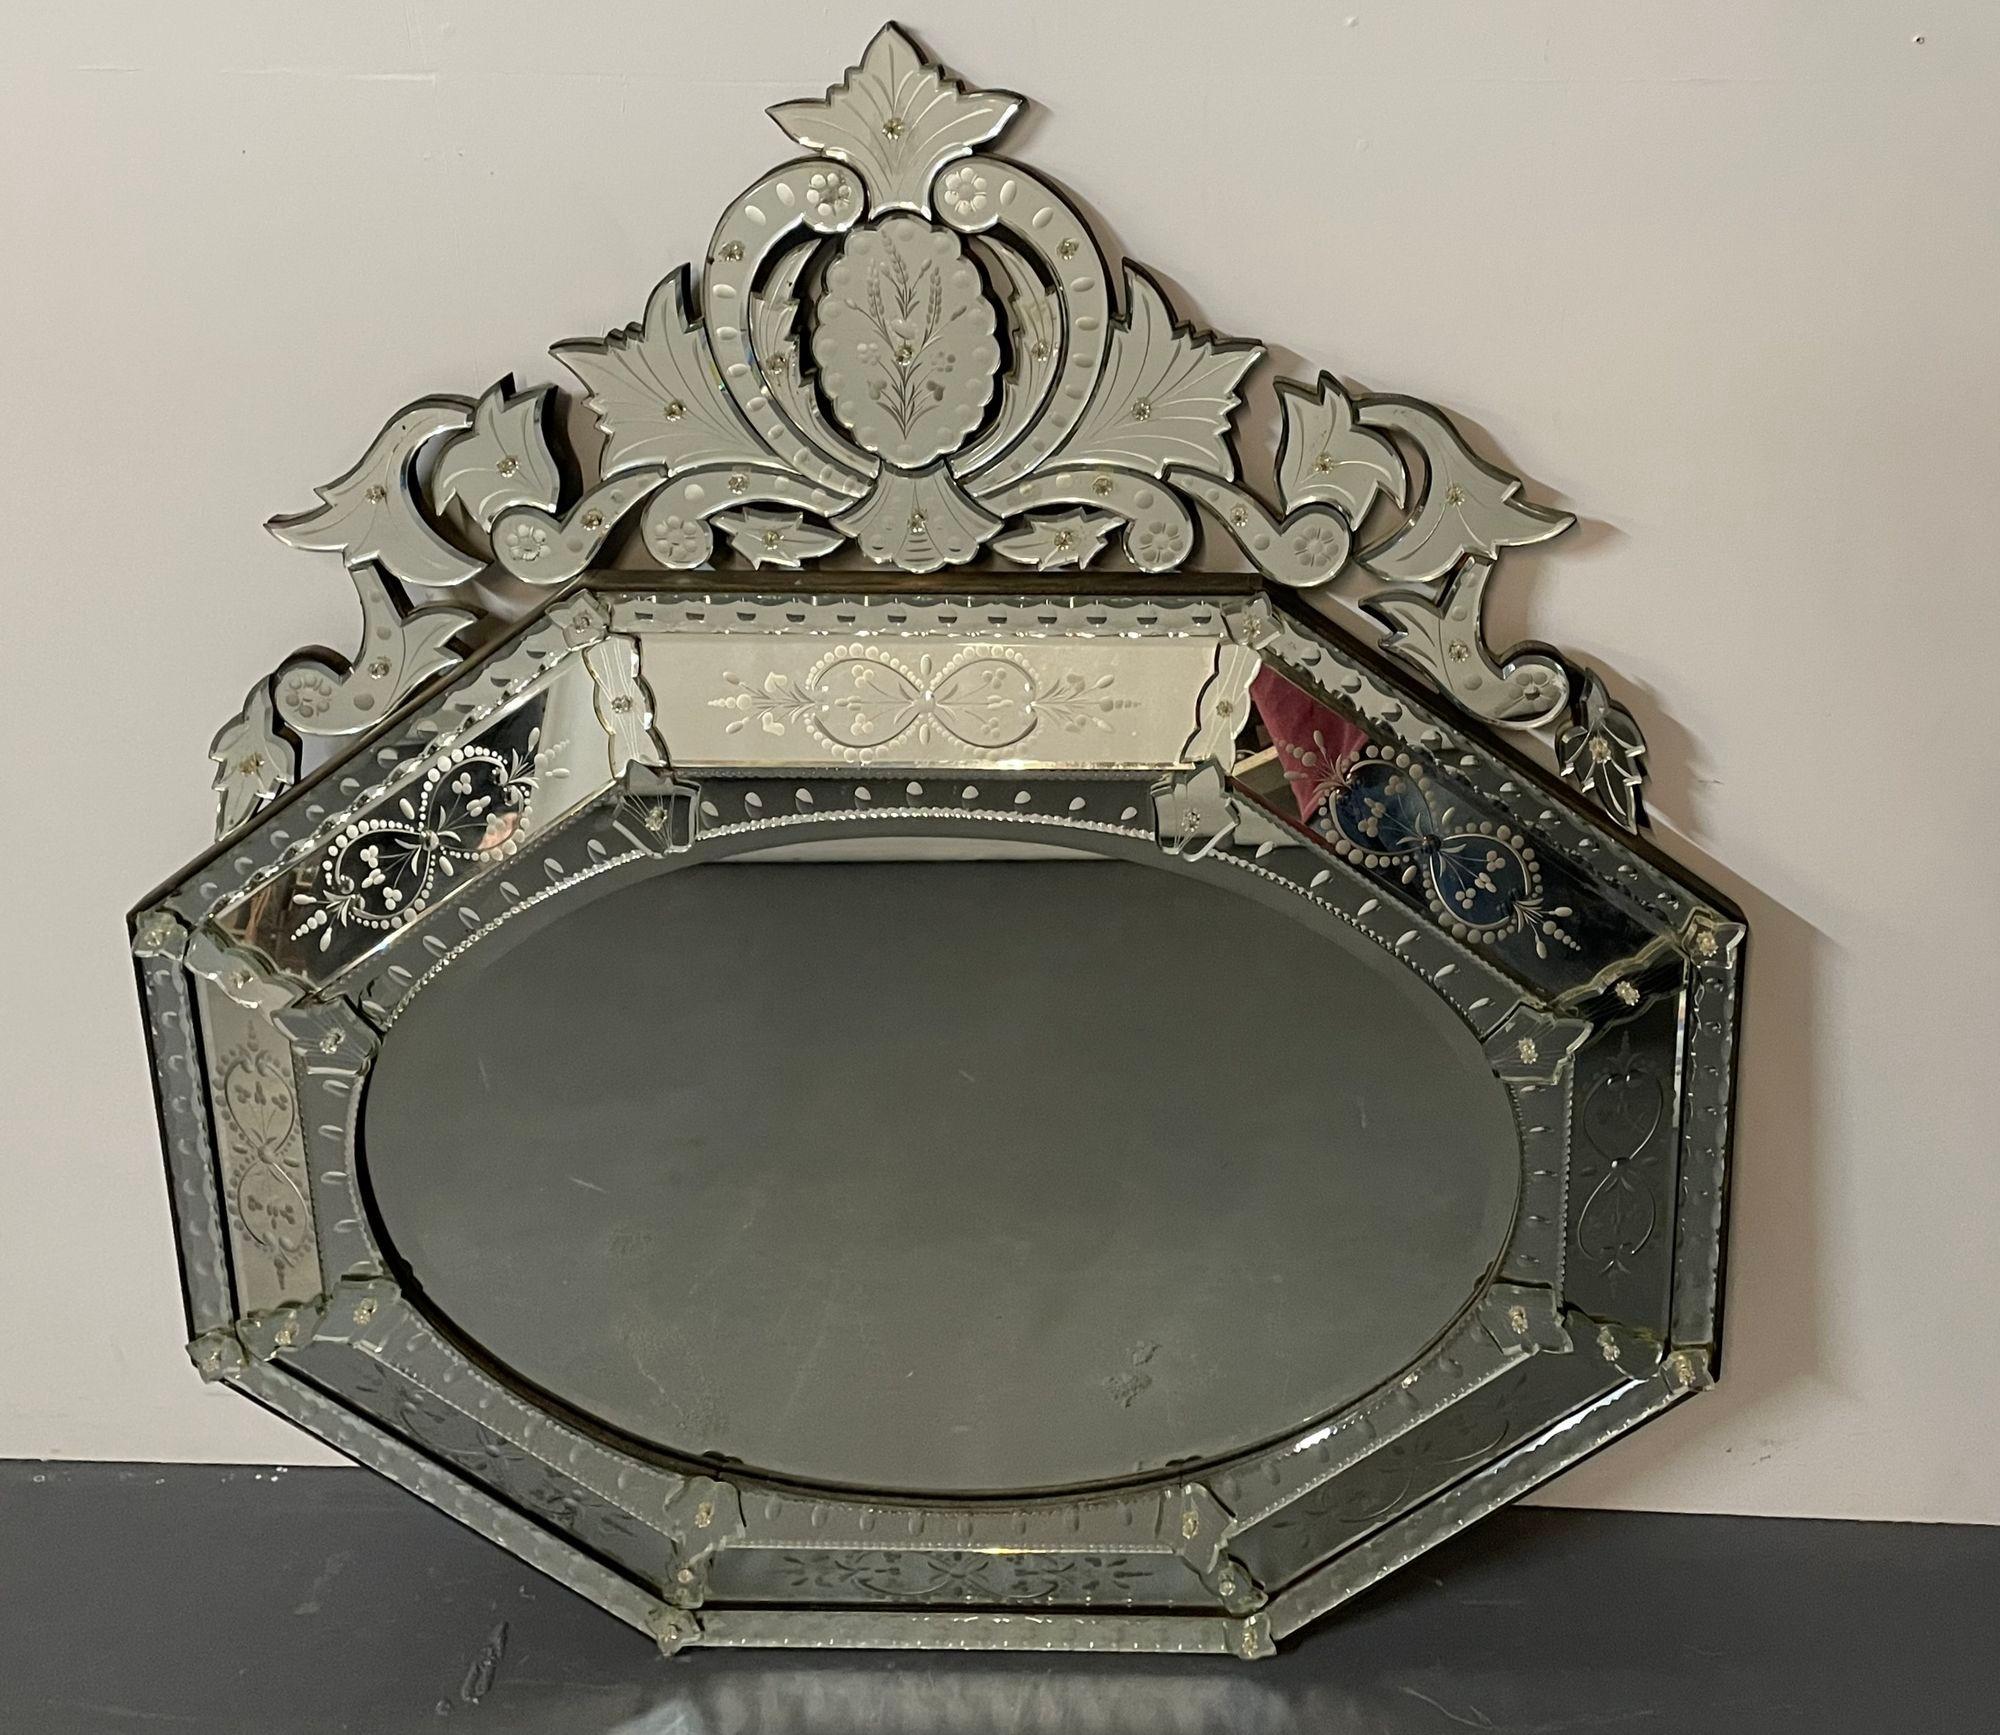 Large French Venetian style wall / console mirror, floral etched glass, beveled, Stamped MADE IN FRANCE on reverse. 

Venetian style beveled wall mirror with floral etched glass. This magnificent over the mantle, console, pier or wall mirror is